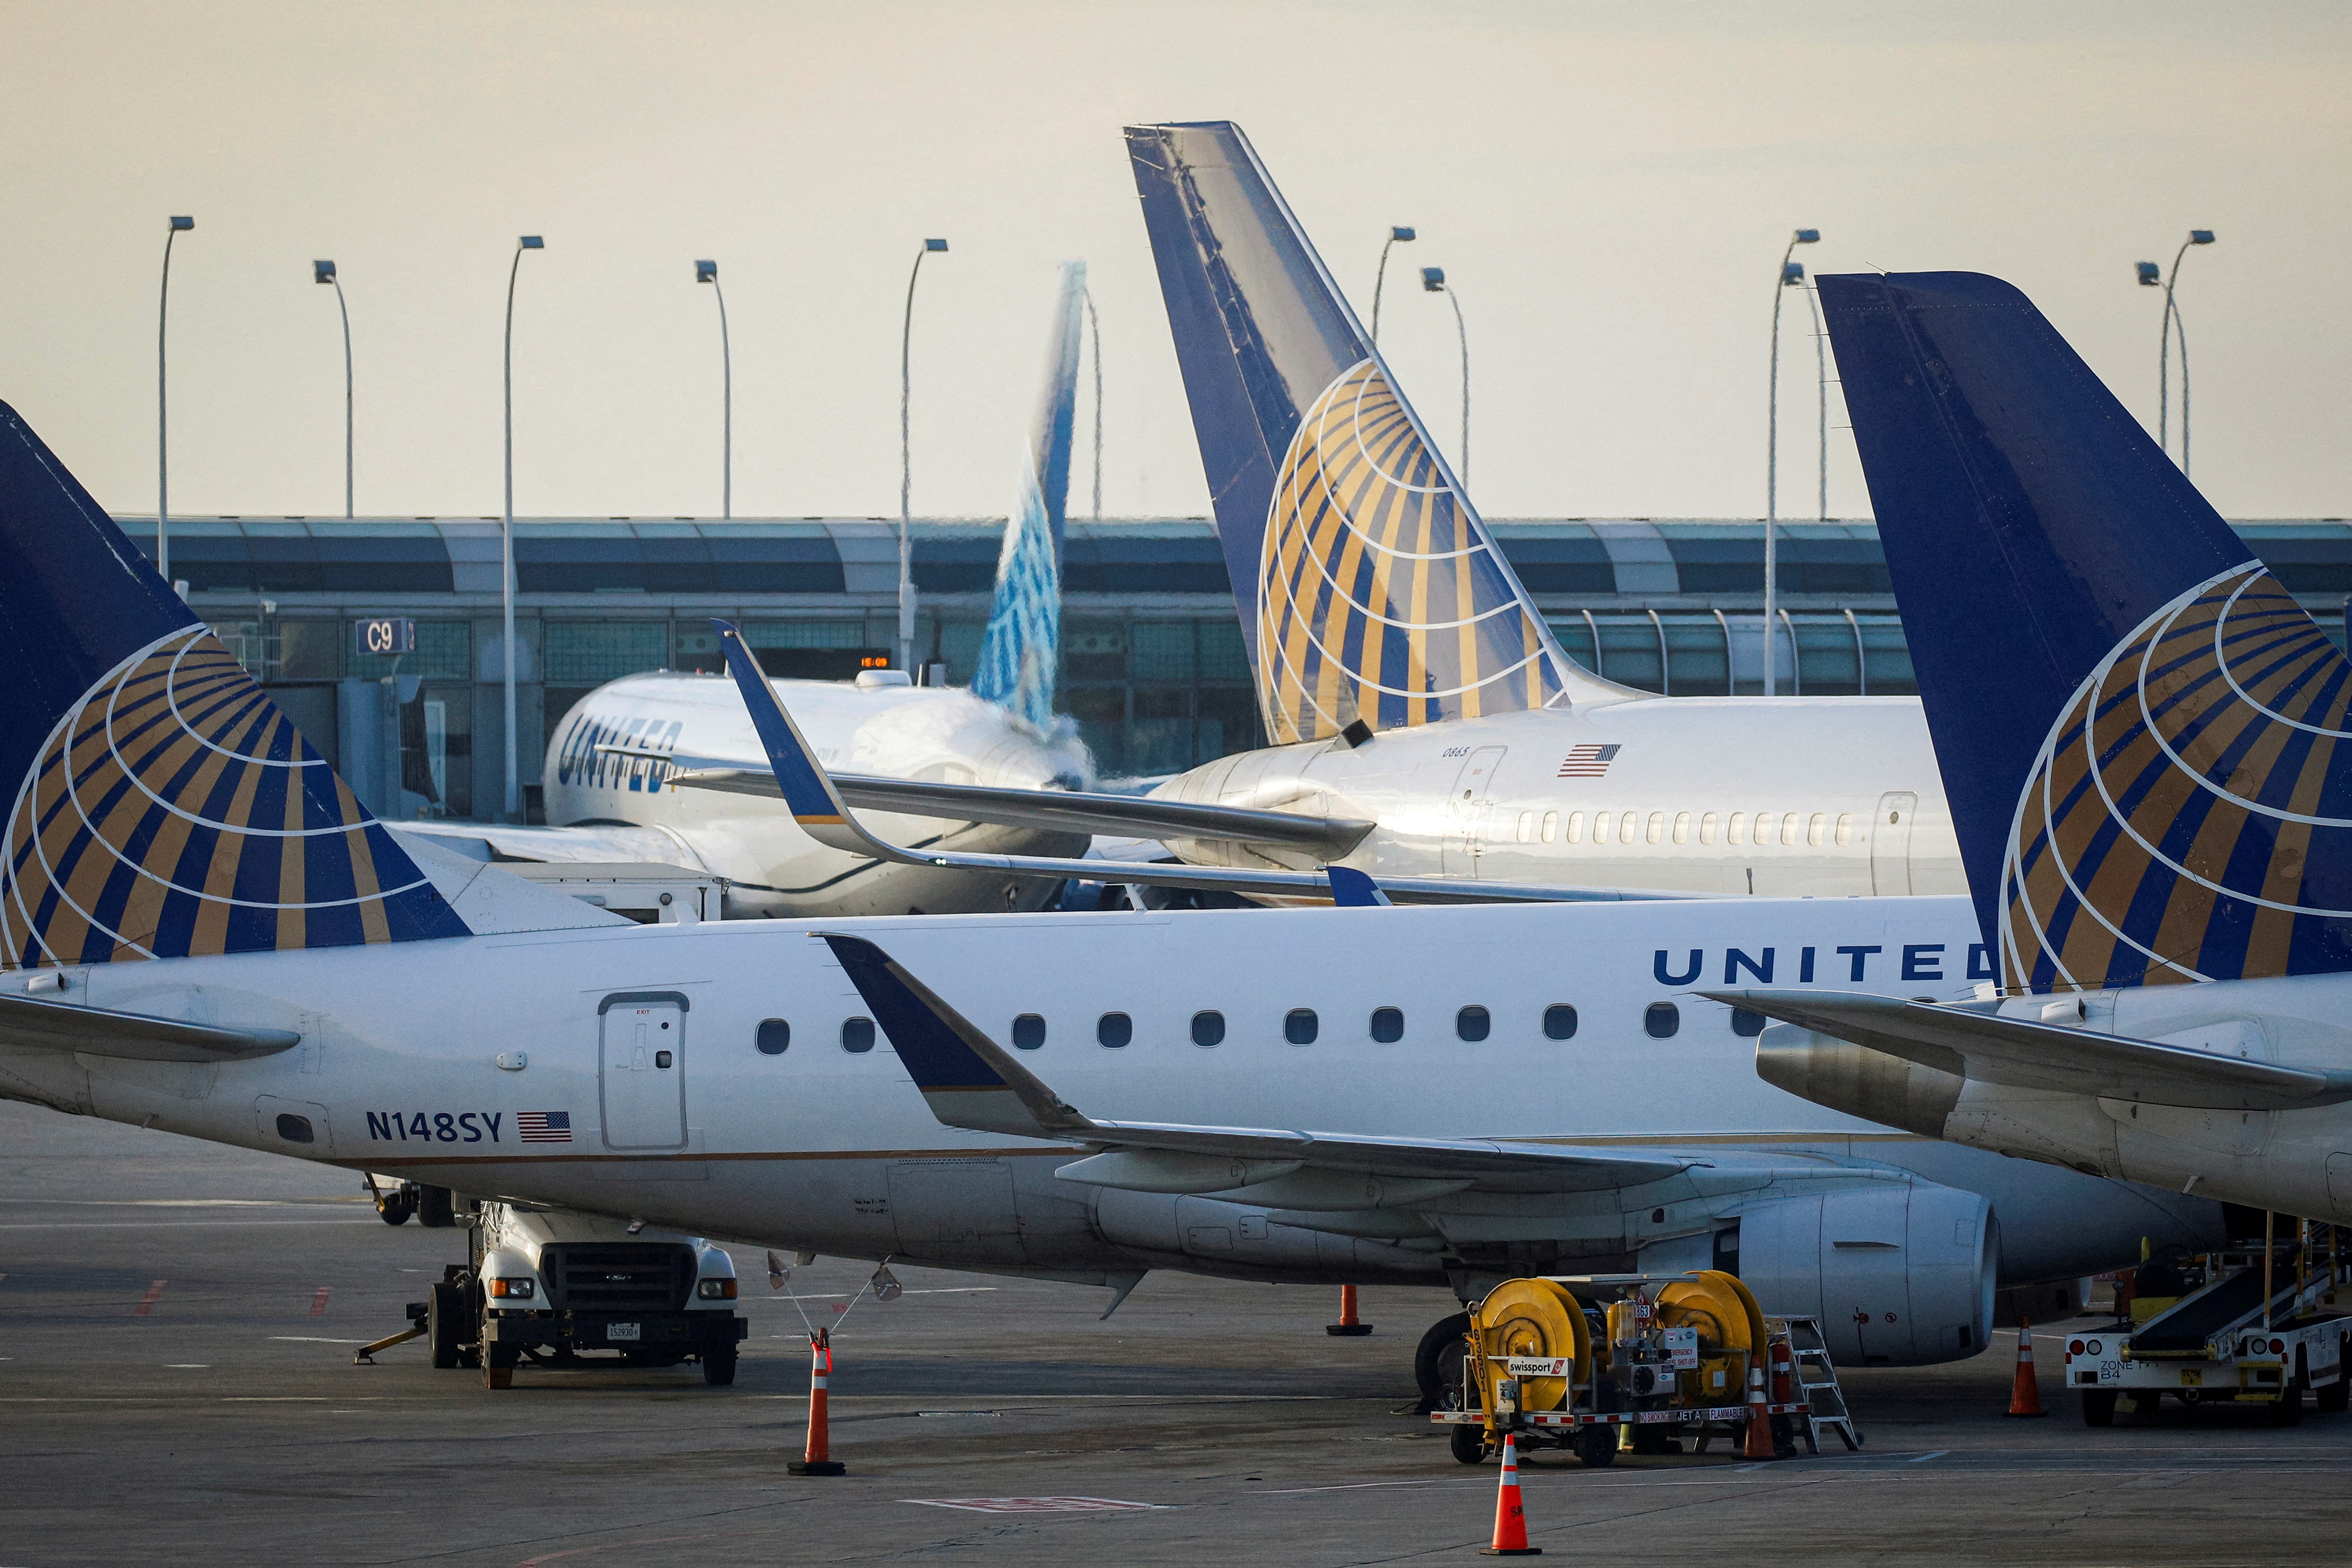 United Airlines planes are parked at their gates at O'Hare International Airport ahead of the Thanksgiving holiday in Chicago, Illinois